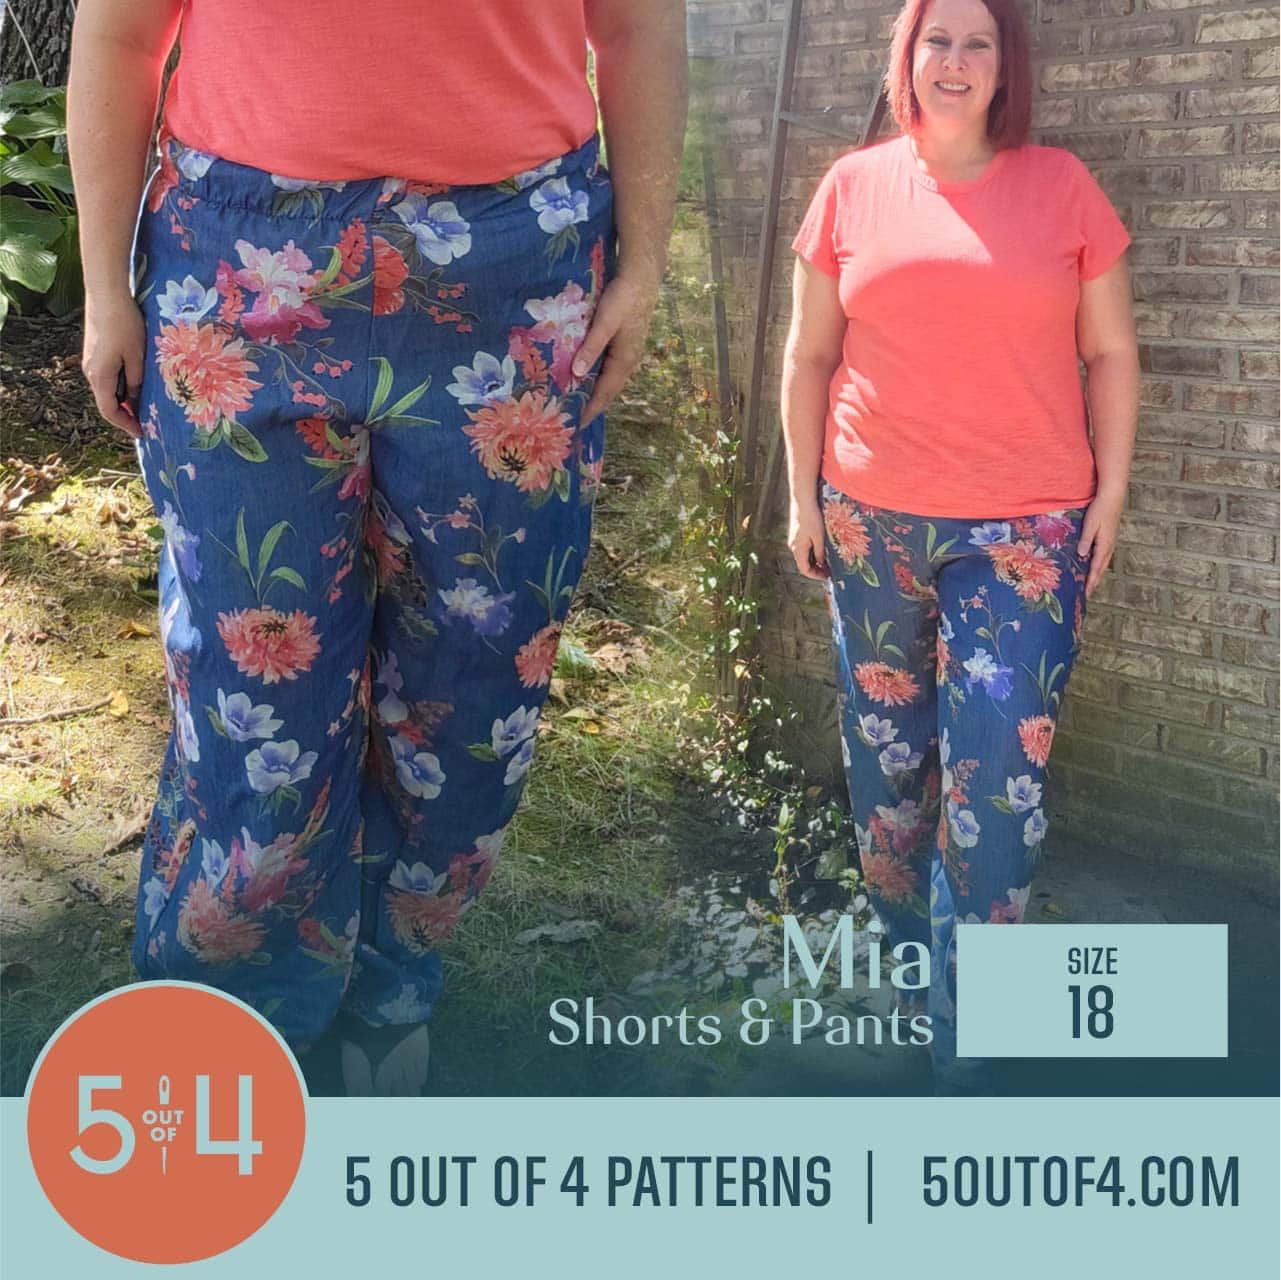 Mia Shorts and Pants - 5 out of 4 Patterns